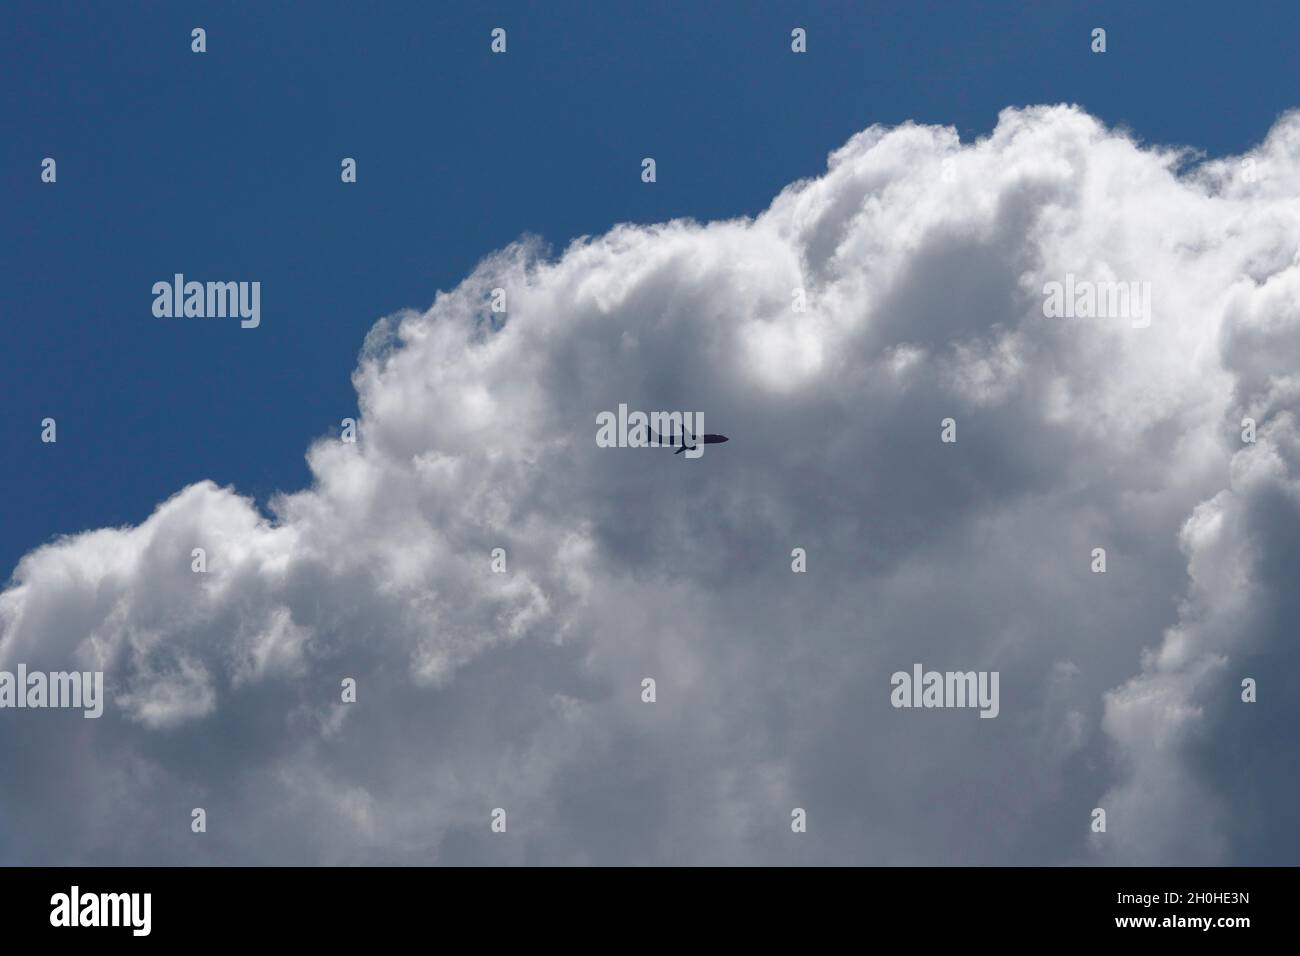 Passenger plane in cloudy sky, Province of Quebec, Canada Stock Photo